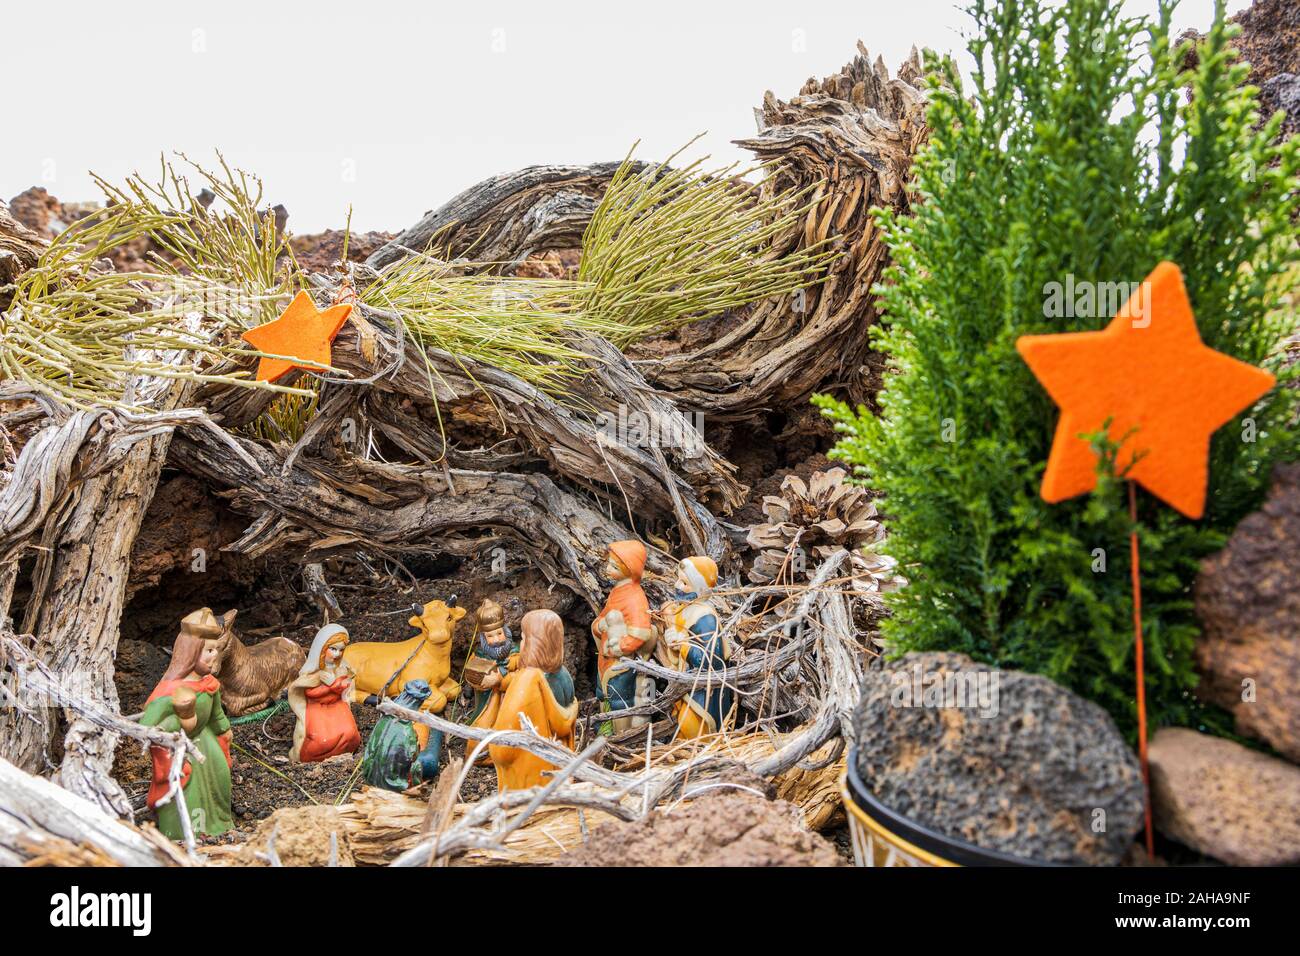 Nativity scene on the ground in the volcanic landscape of the Las Canadas del Teide national park, Tenerife, Canary Islands, Spain Stock Photo